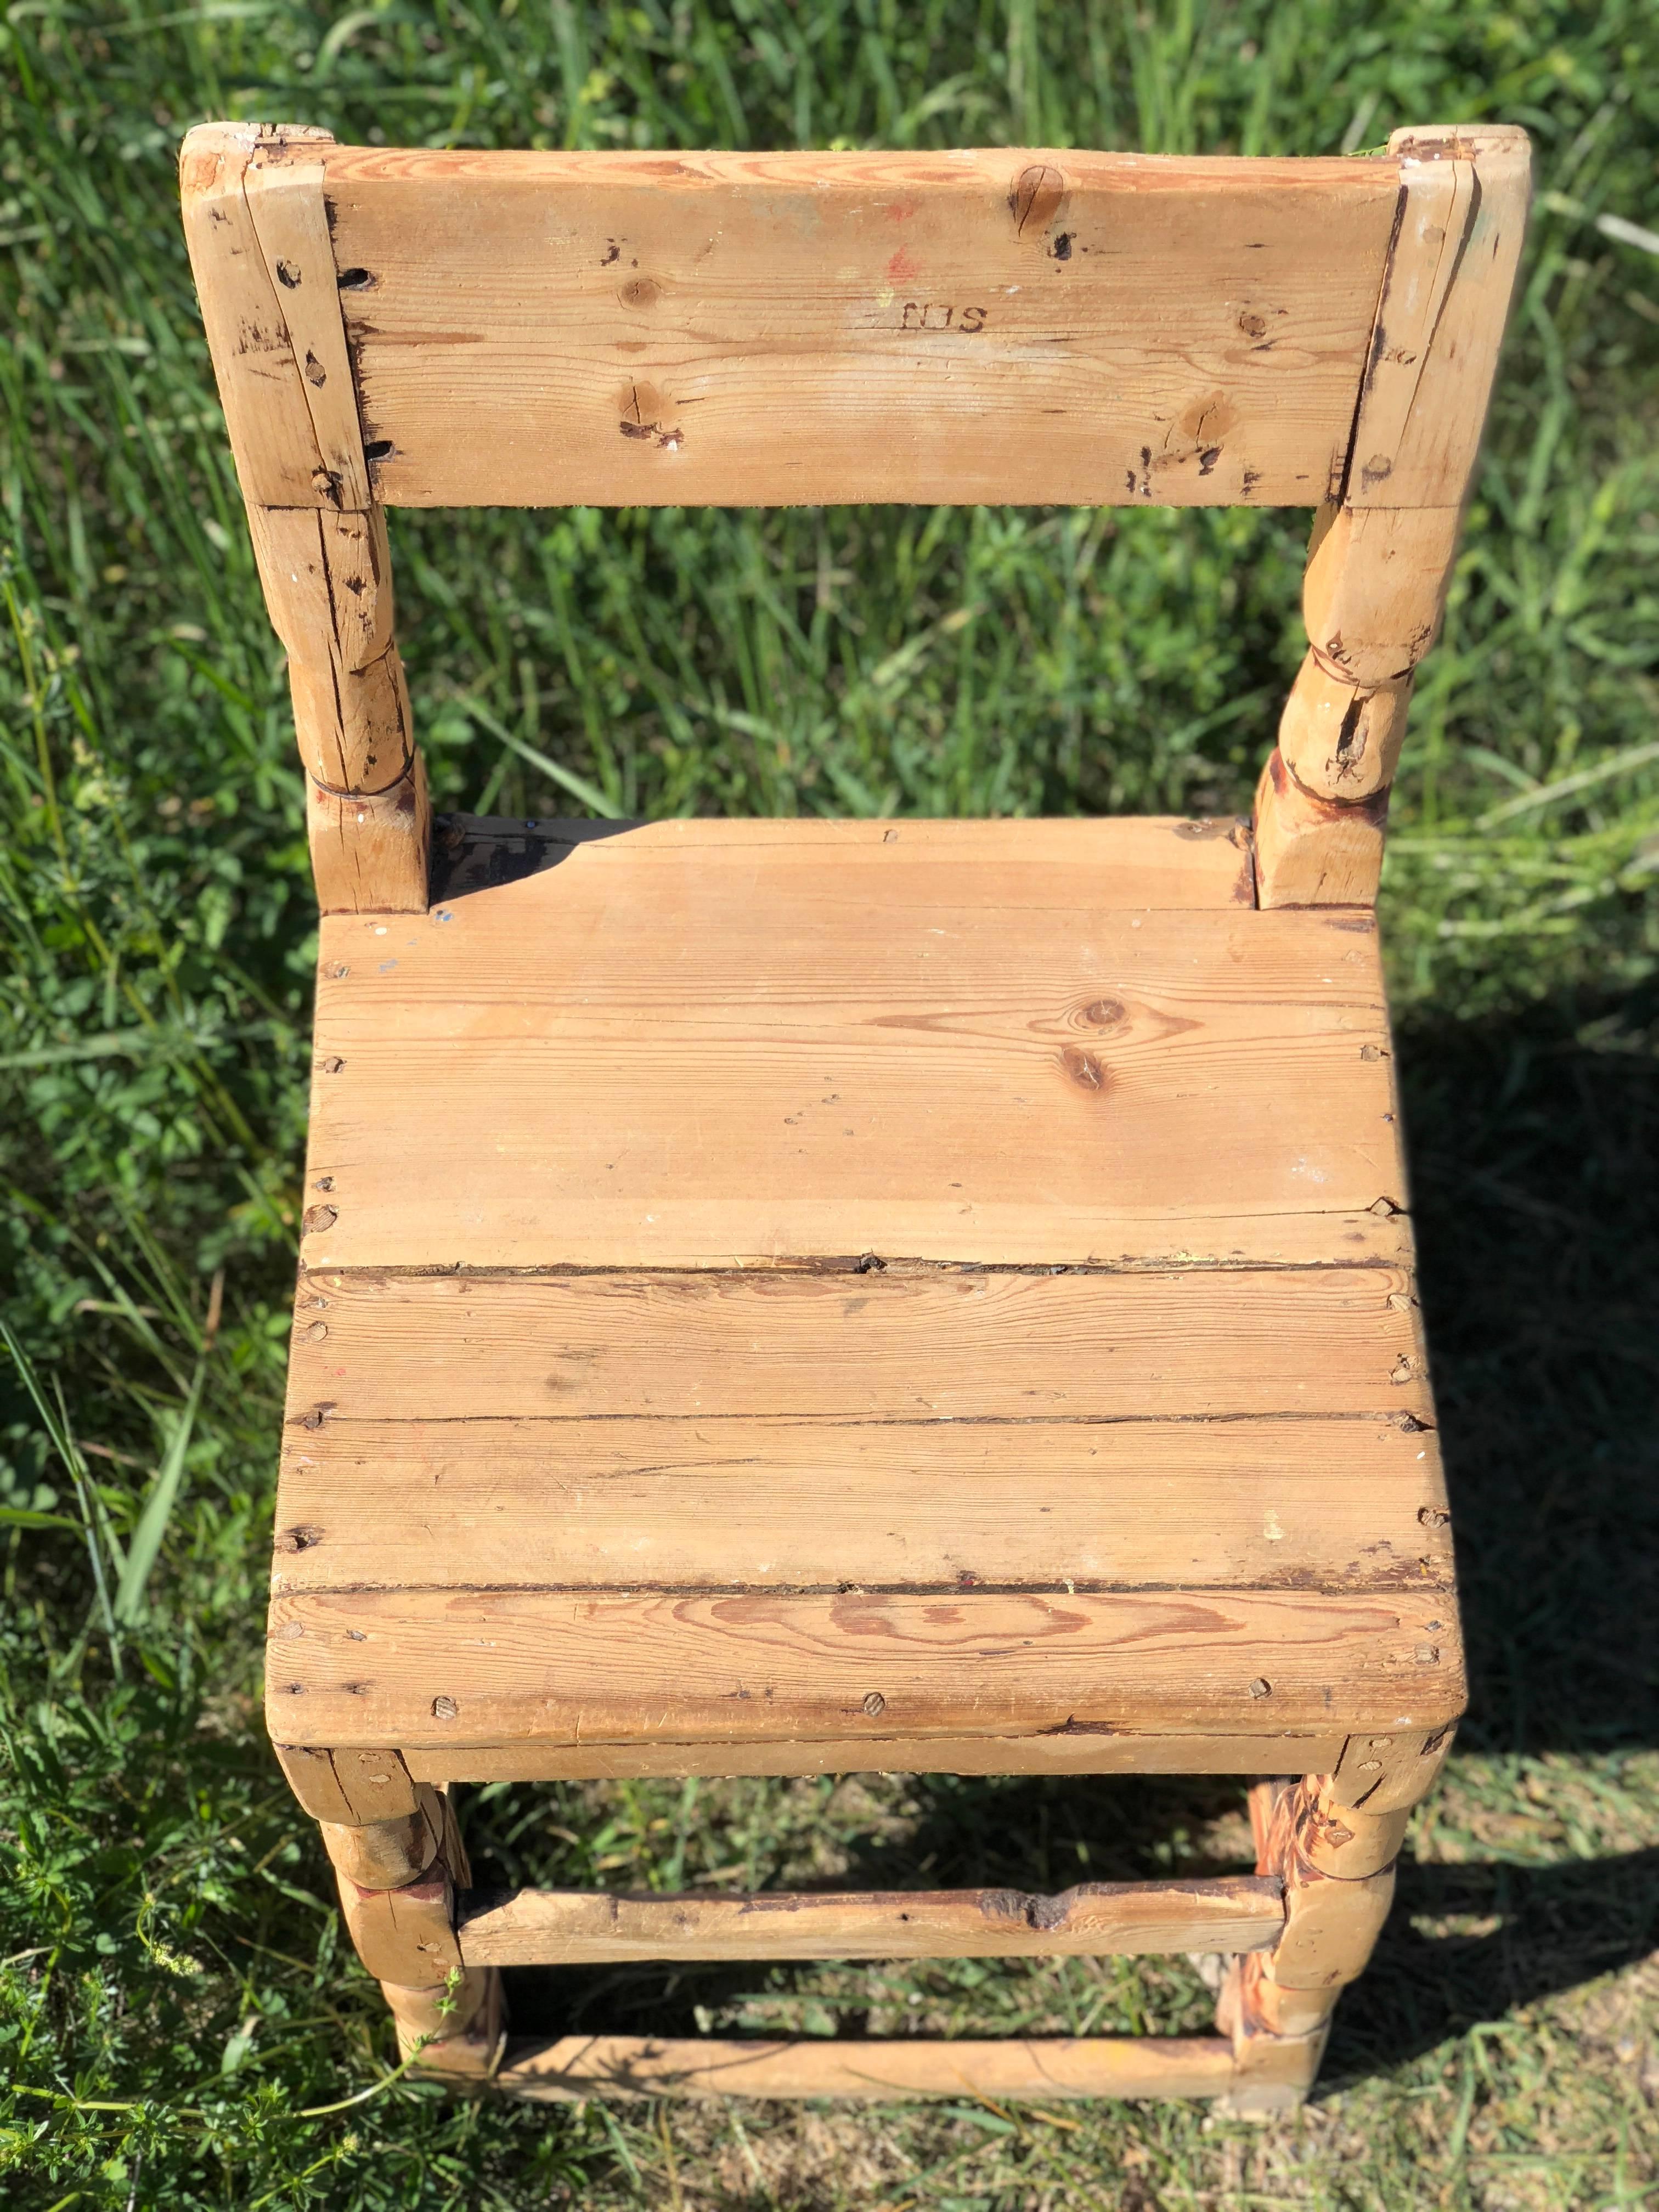 Early 19th century Swedish wooden chair. Very unique patina.

Measures: H 79 cm 
W 39 cm 
D 36 cm.